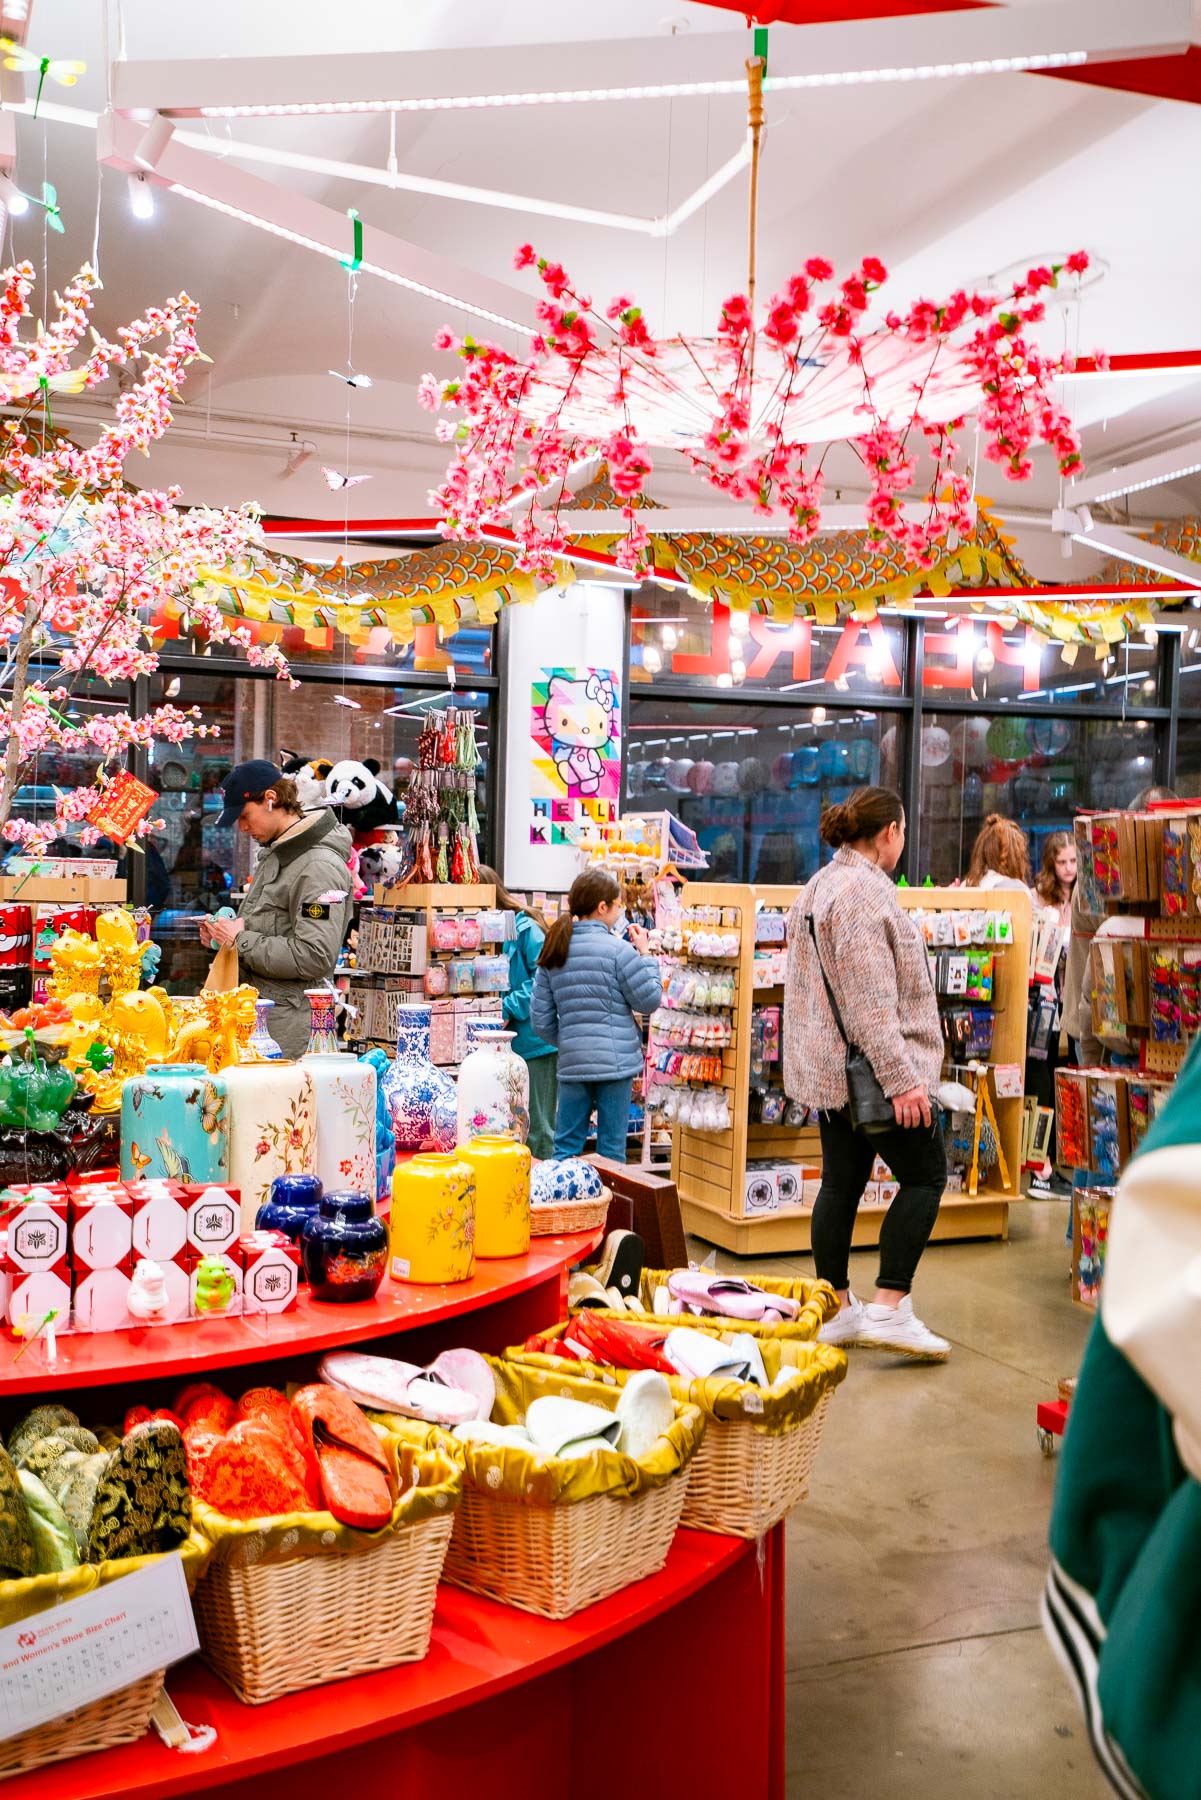 Crowds shopping at the Chelsea Market Pearl River Mart, one of the best stores at the Chelsea Market